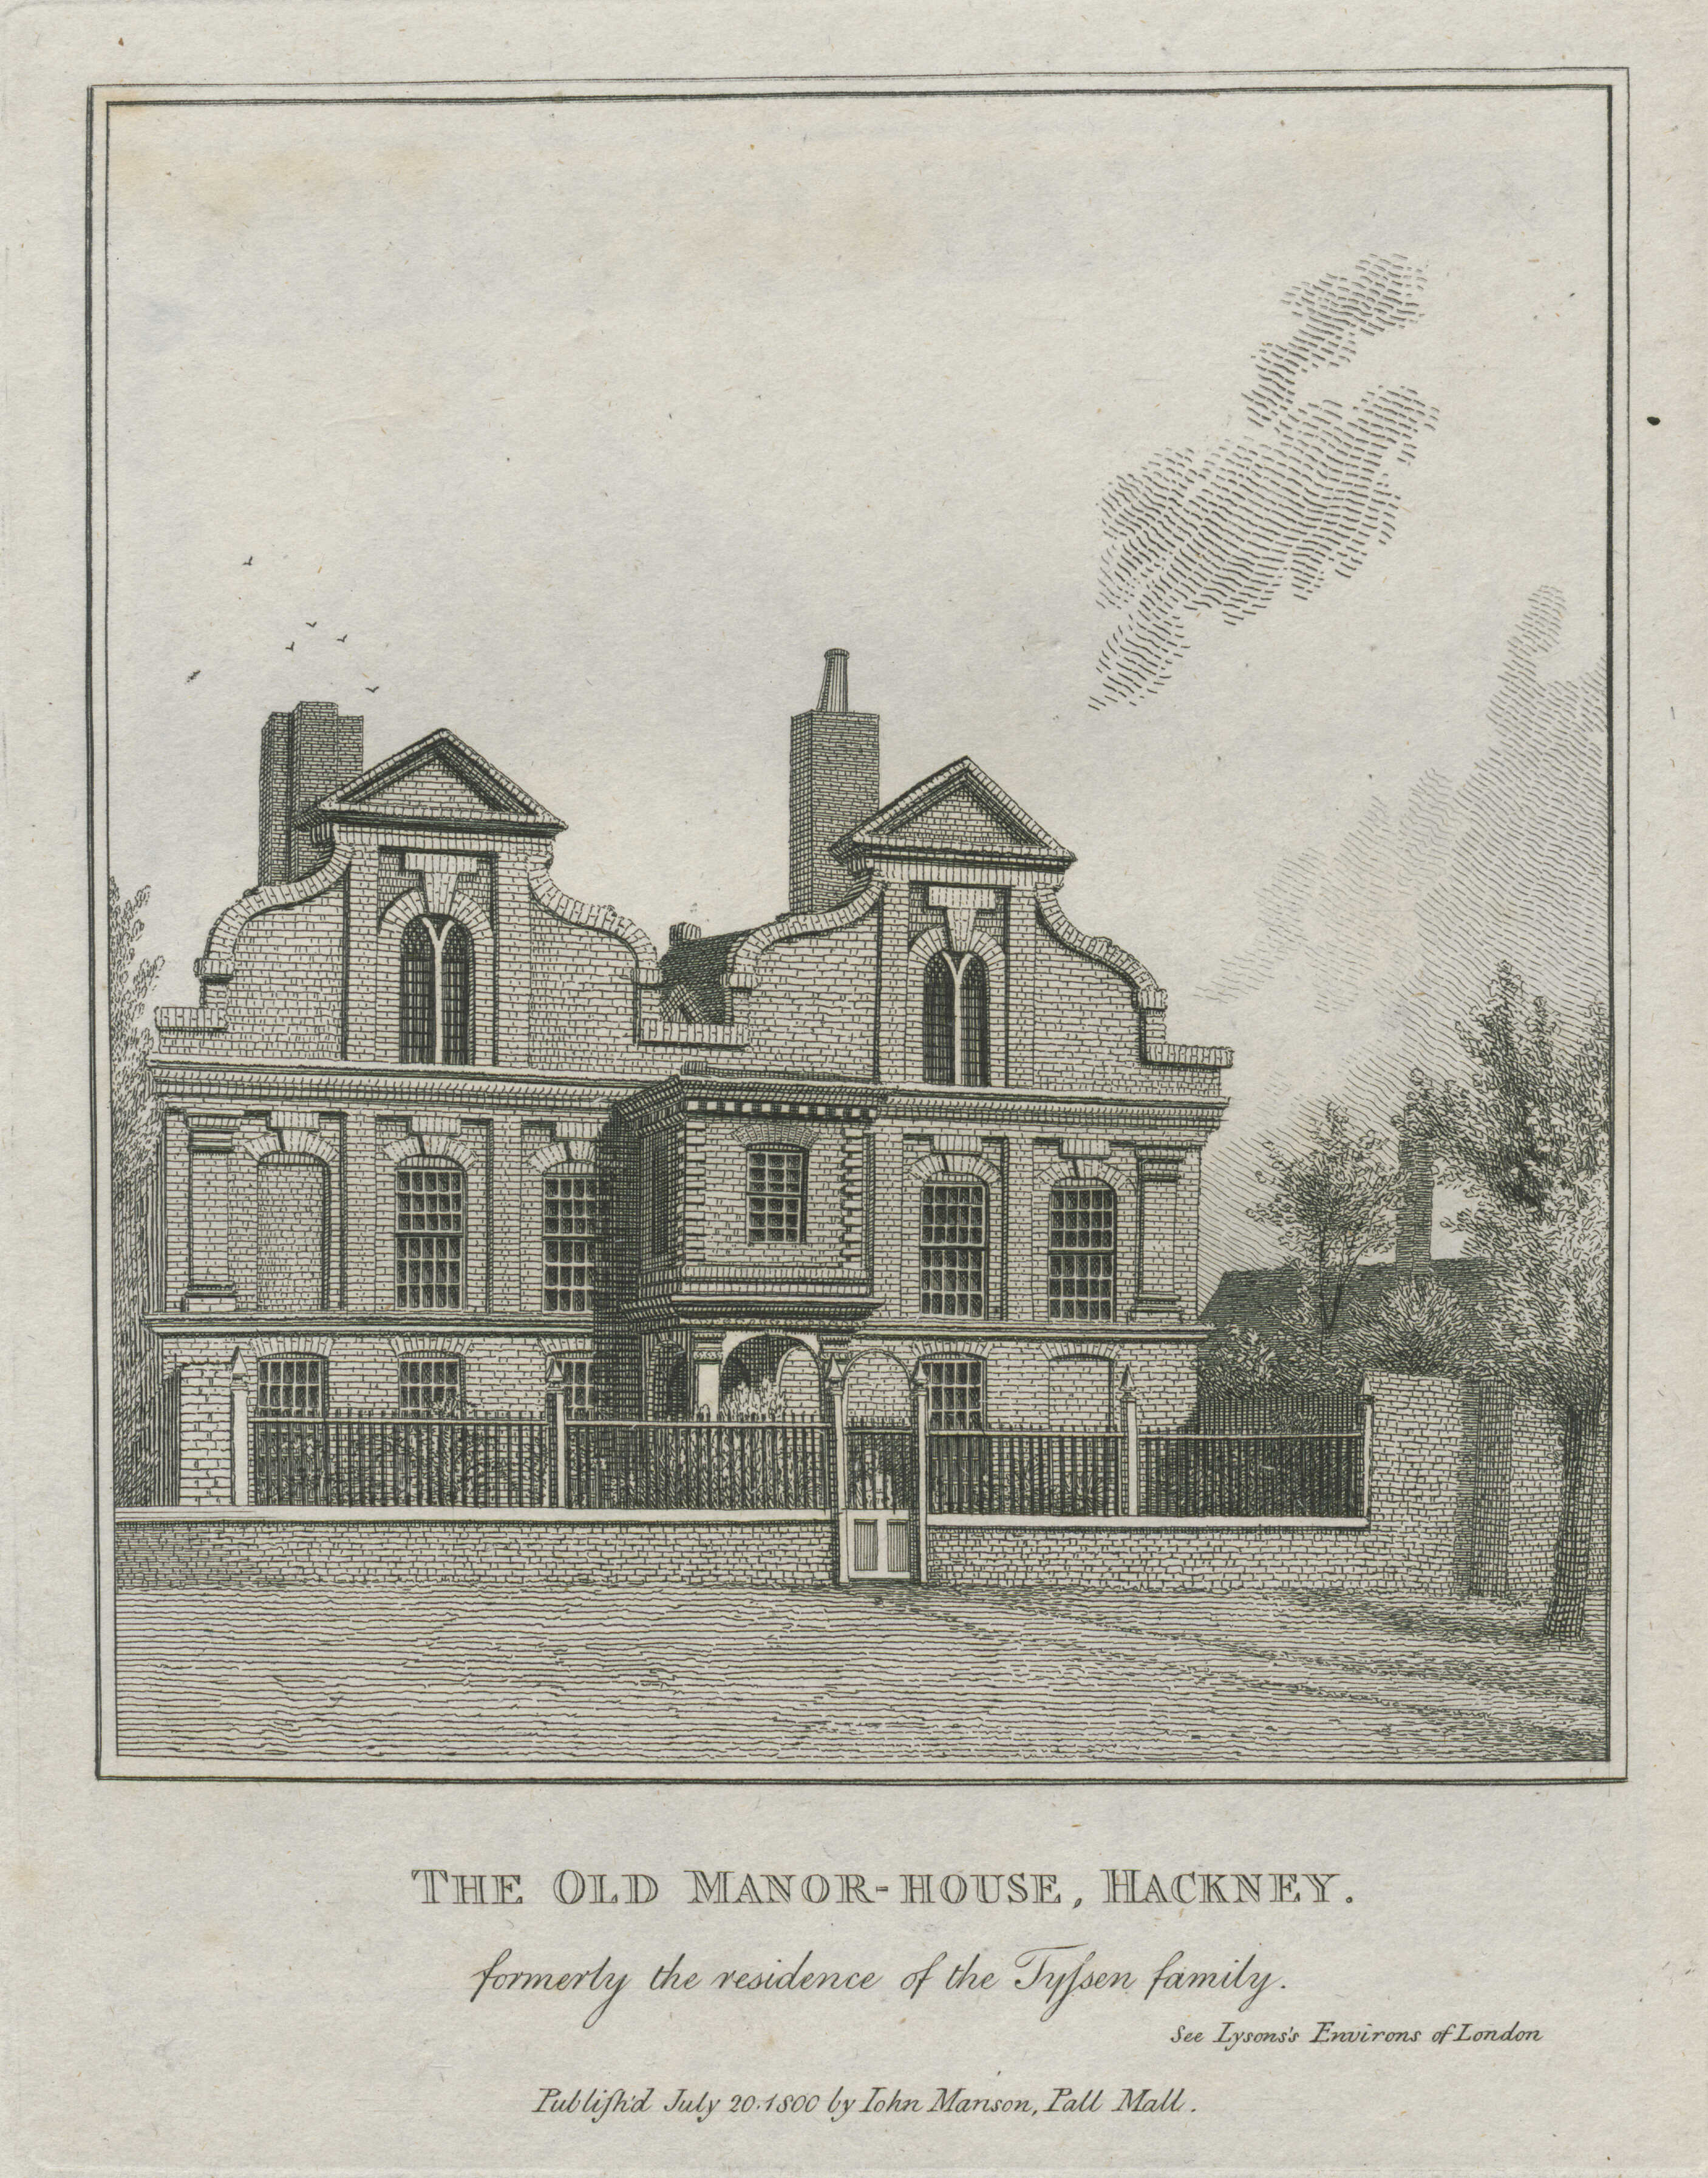 83-the-old-manor-house-hackney-formerly-the-residence-of-the-tyssen-family